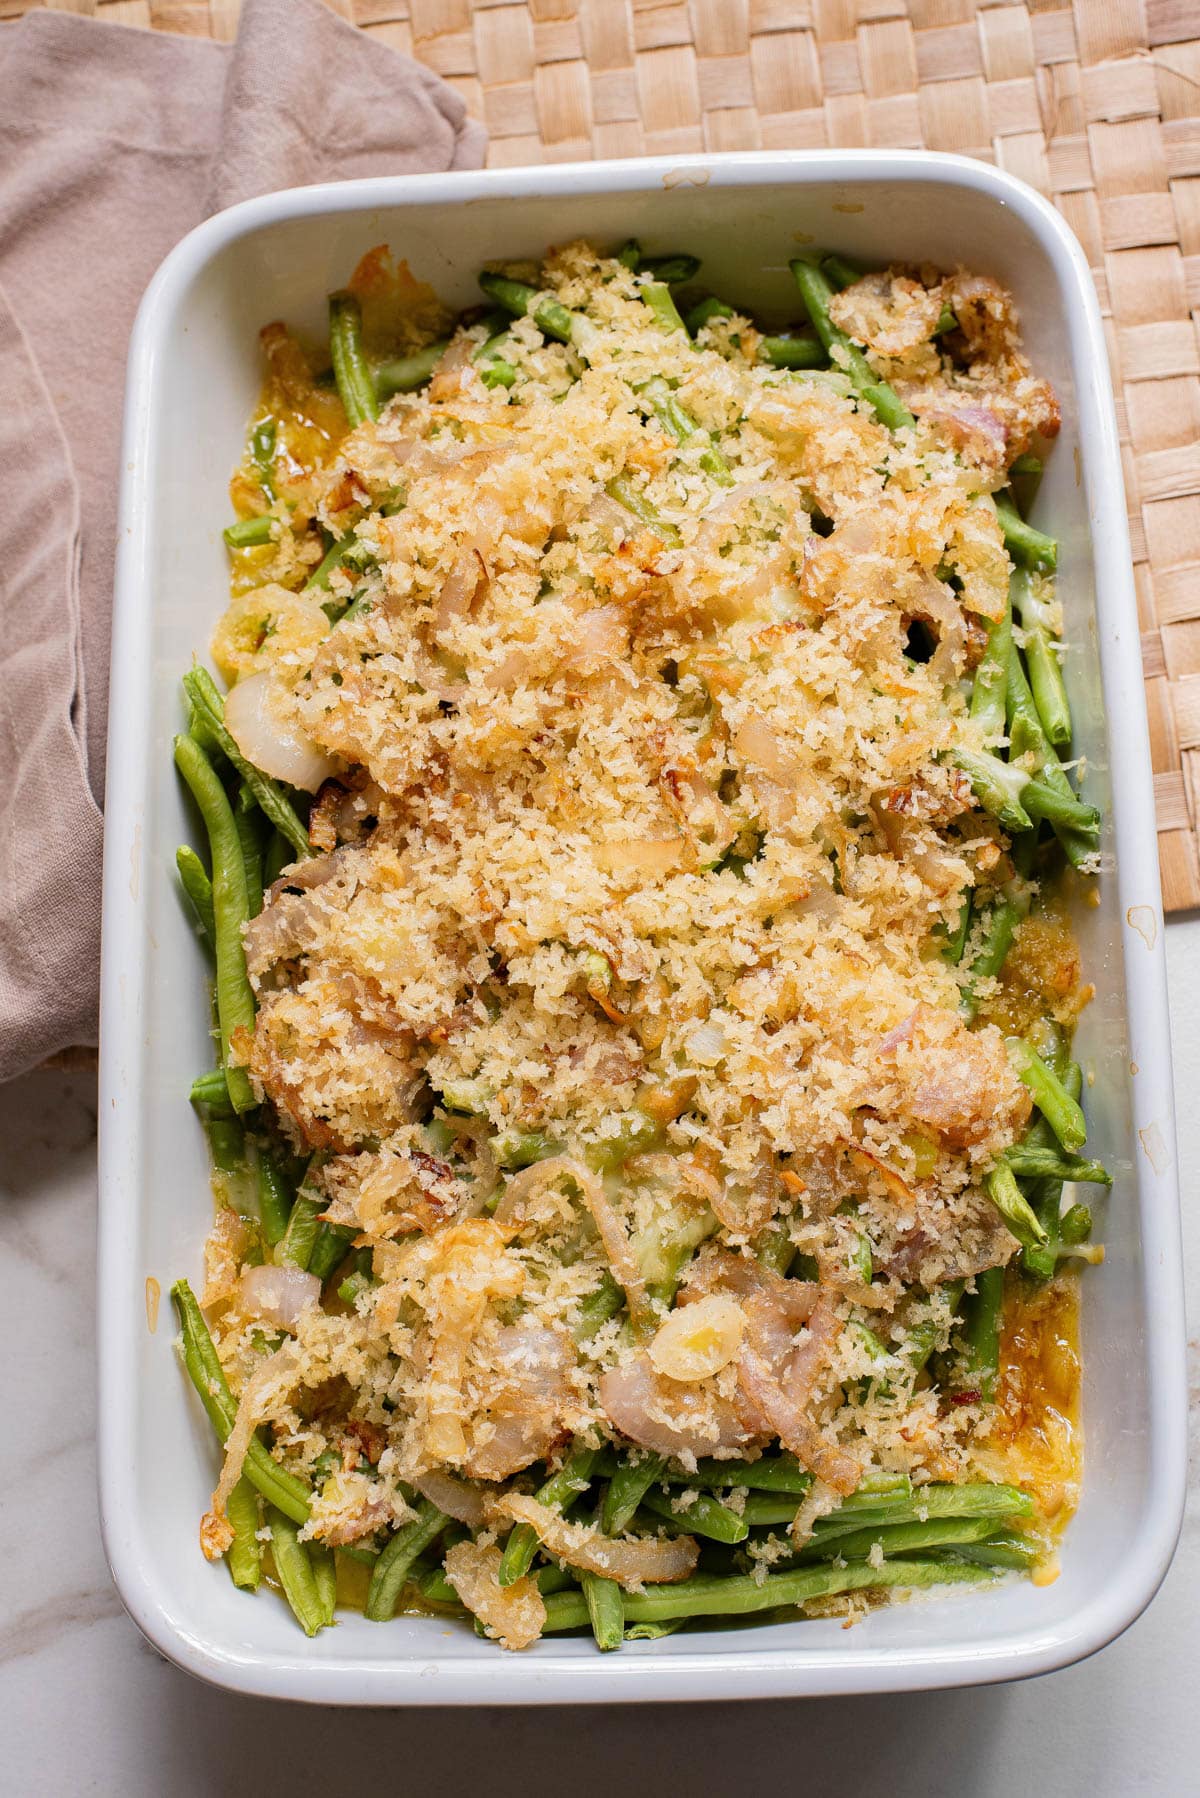 Broiled Green bean casserole in white baking dish with crispy onion topping.